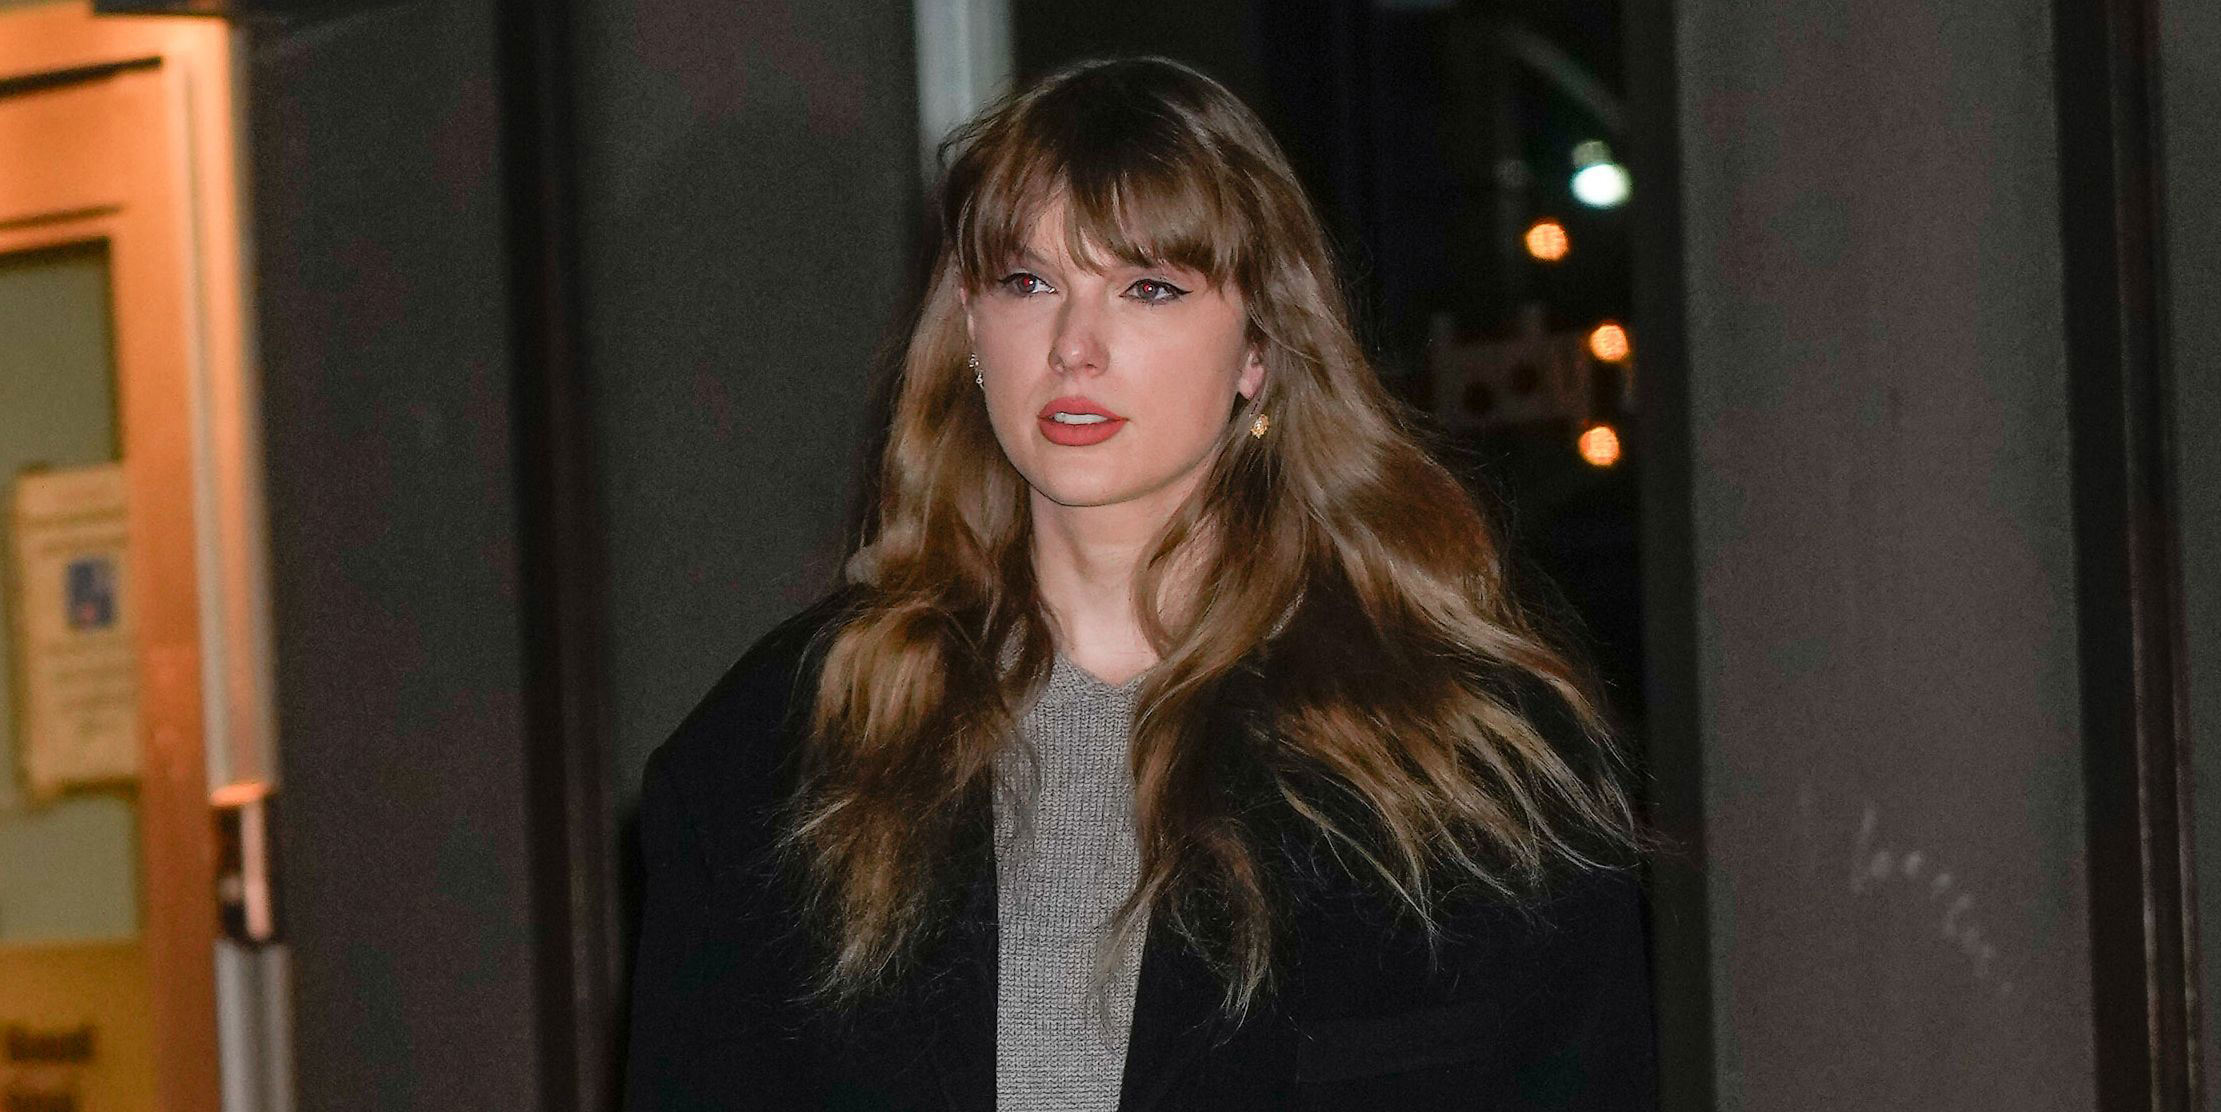 Taylor Swift Steps Out in a Cozy Cashmere Dress